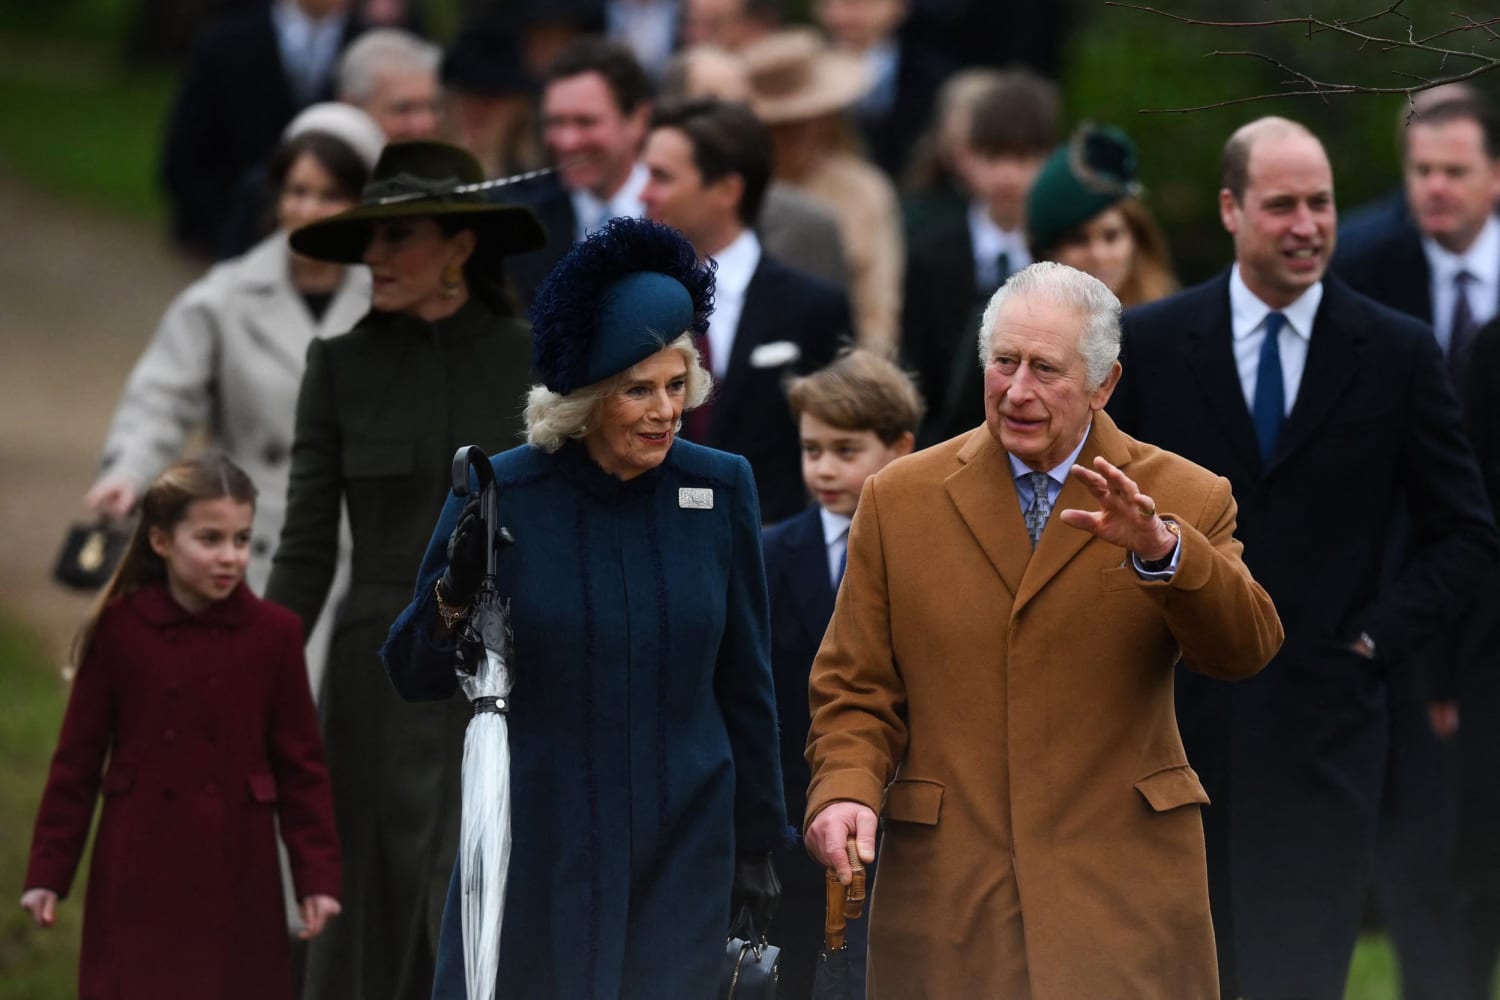 King Charles praises struggling workers amid cost-of-living crisis in his first Christmas address